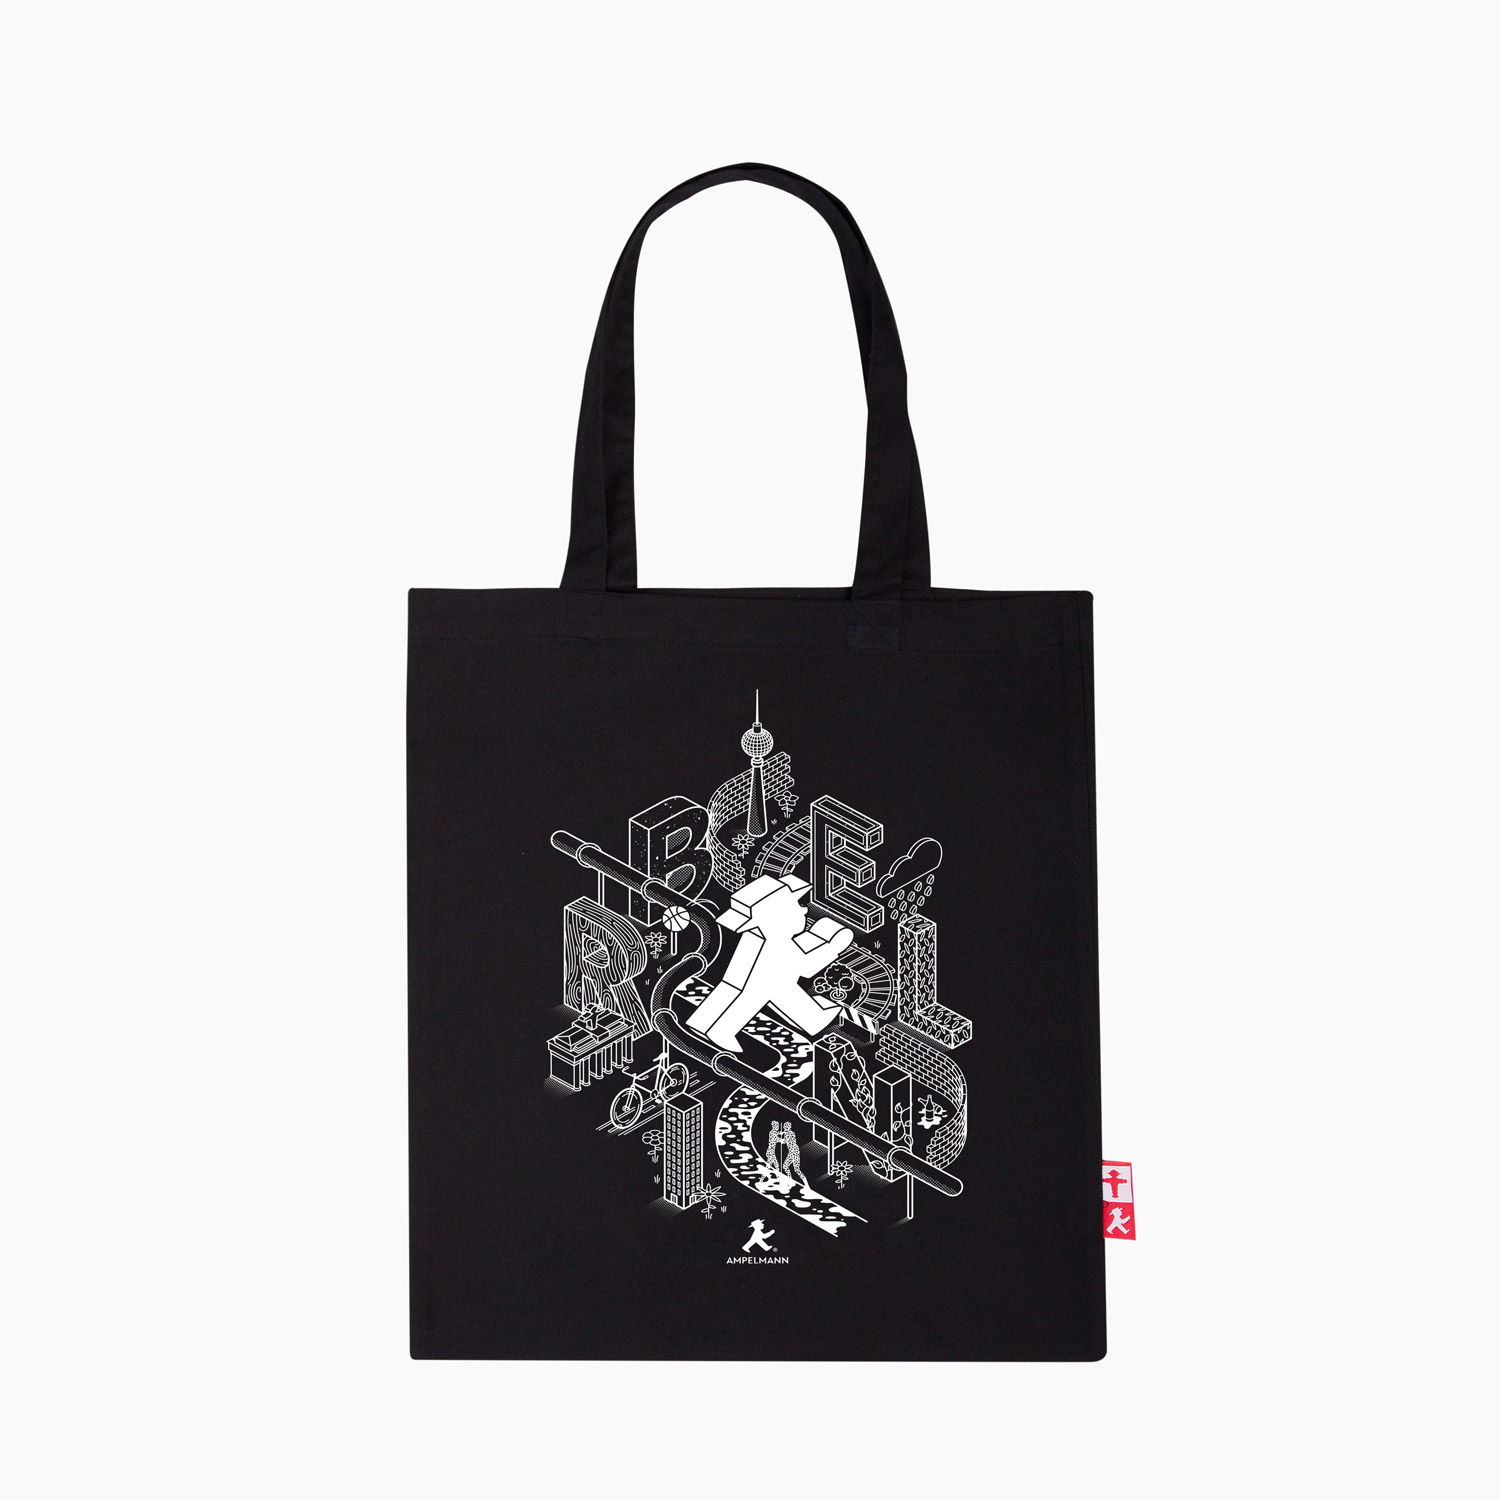 CITY RESIDENT / Tote Bag